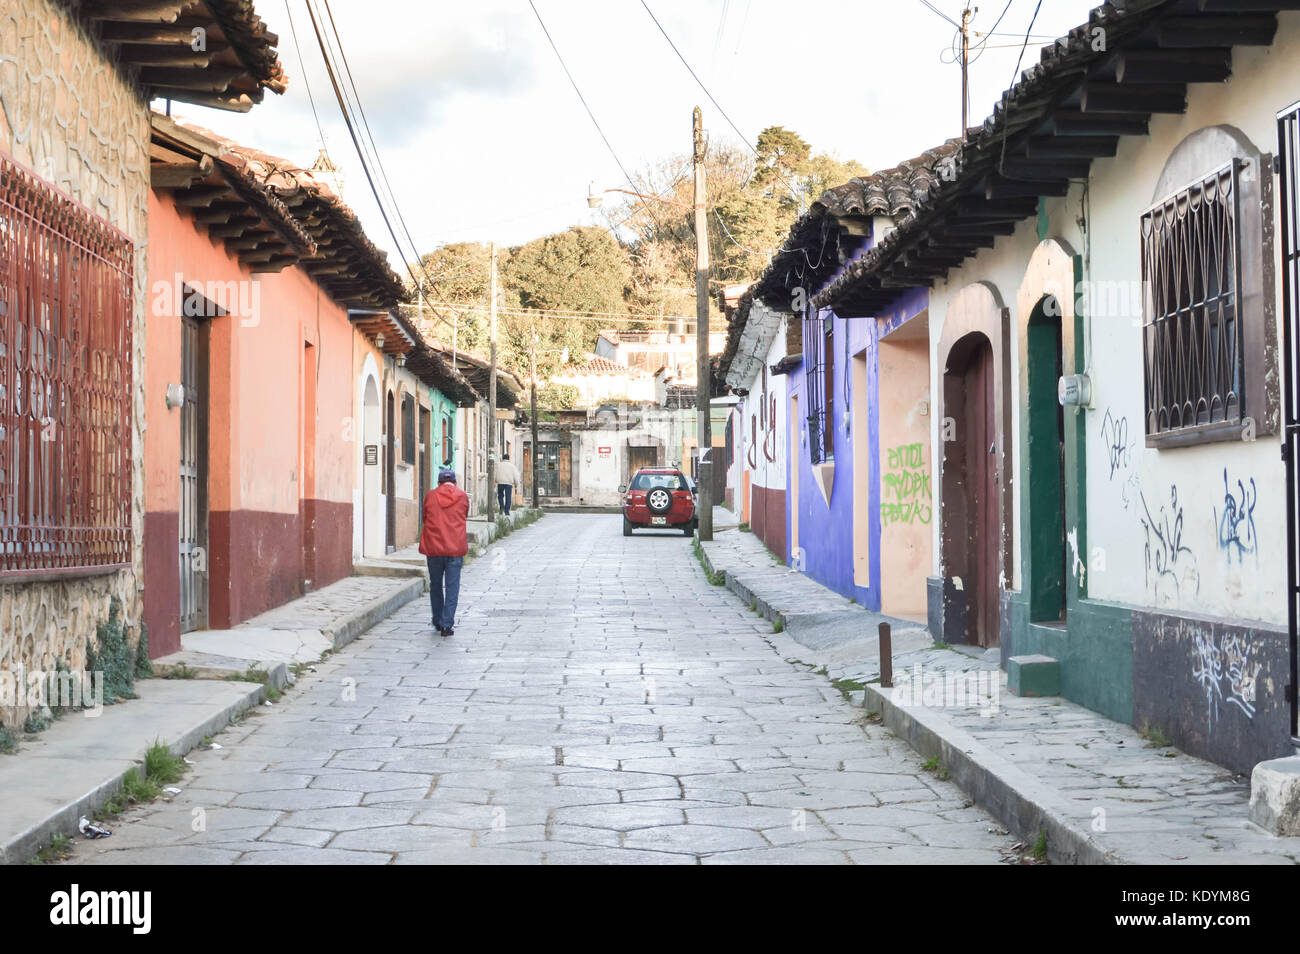 San Cristobal De Las Casas, Mexico - December 4, 2014: People are seen in the streets of the colonial town of San Cristobal De Las Casas on December 4 Stock Photo